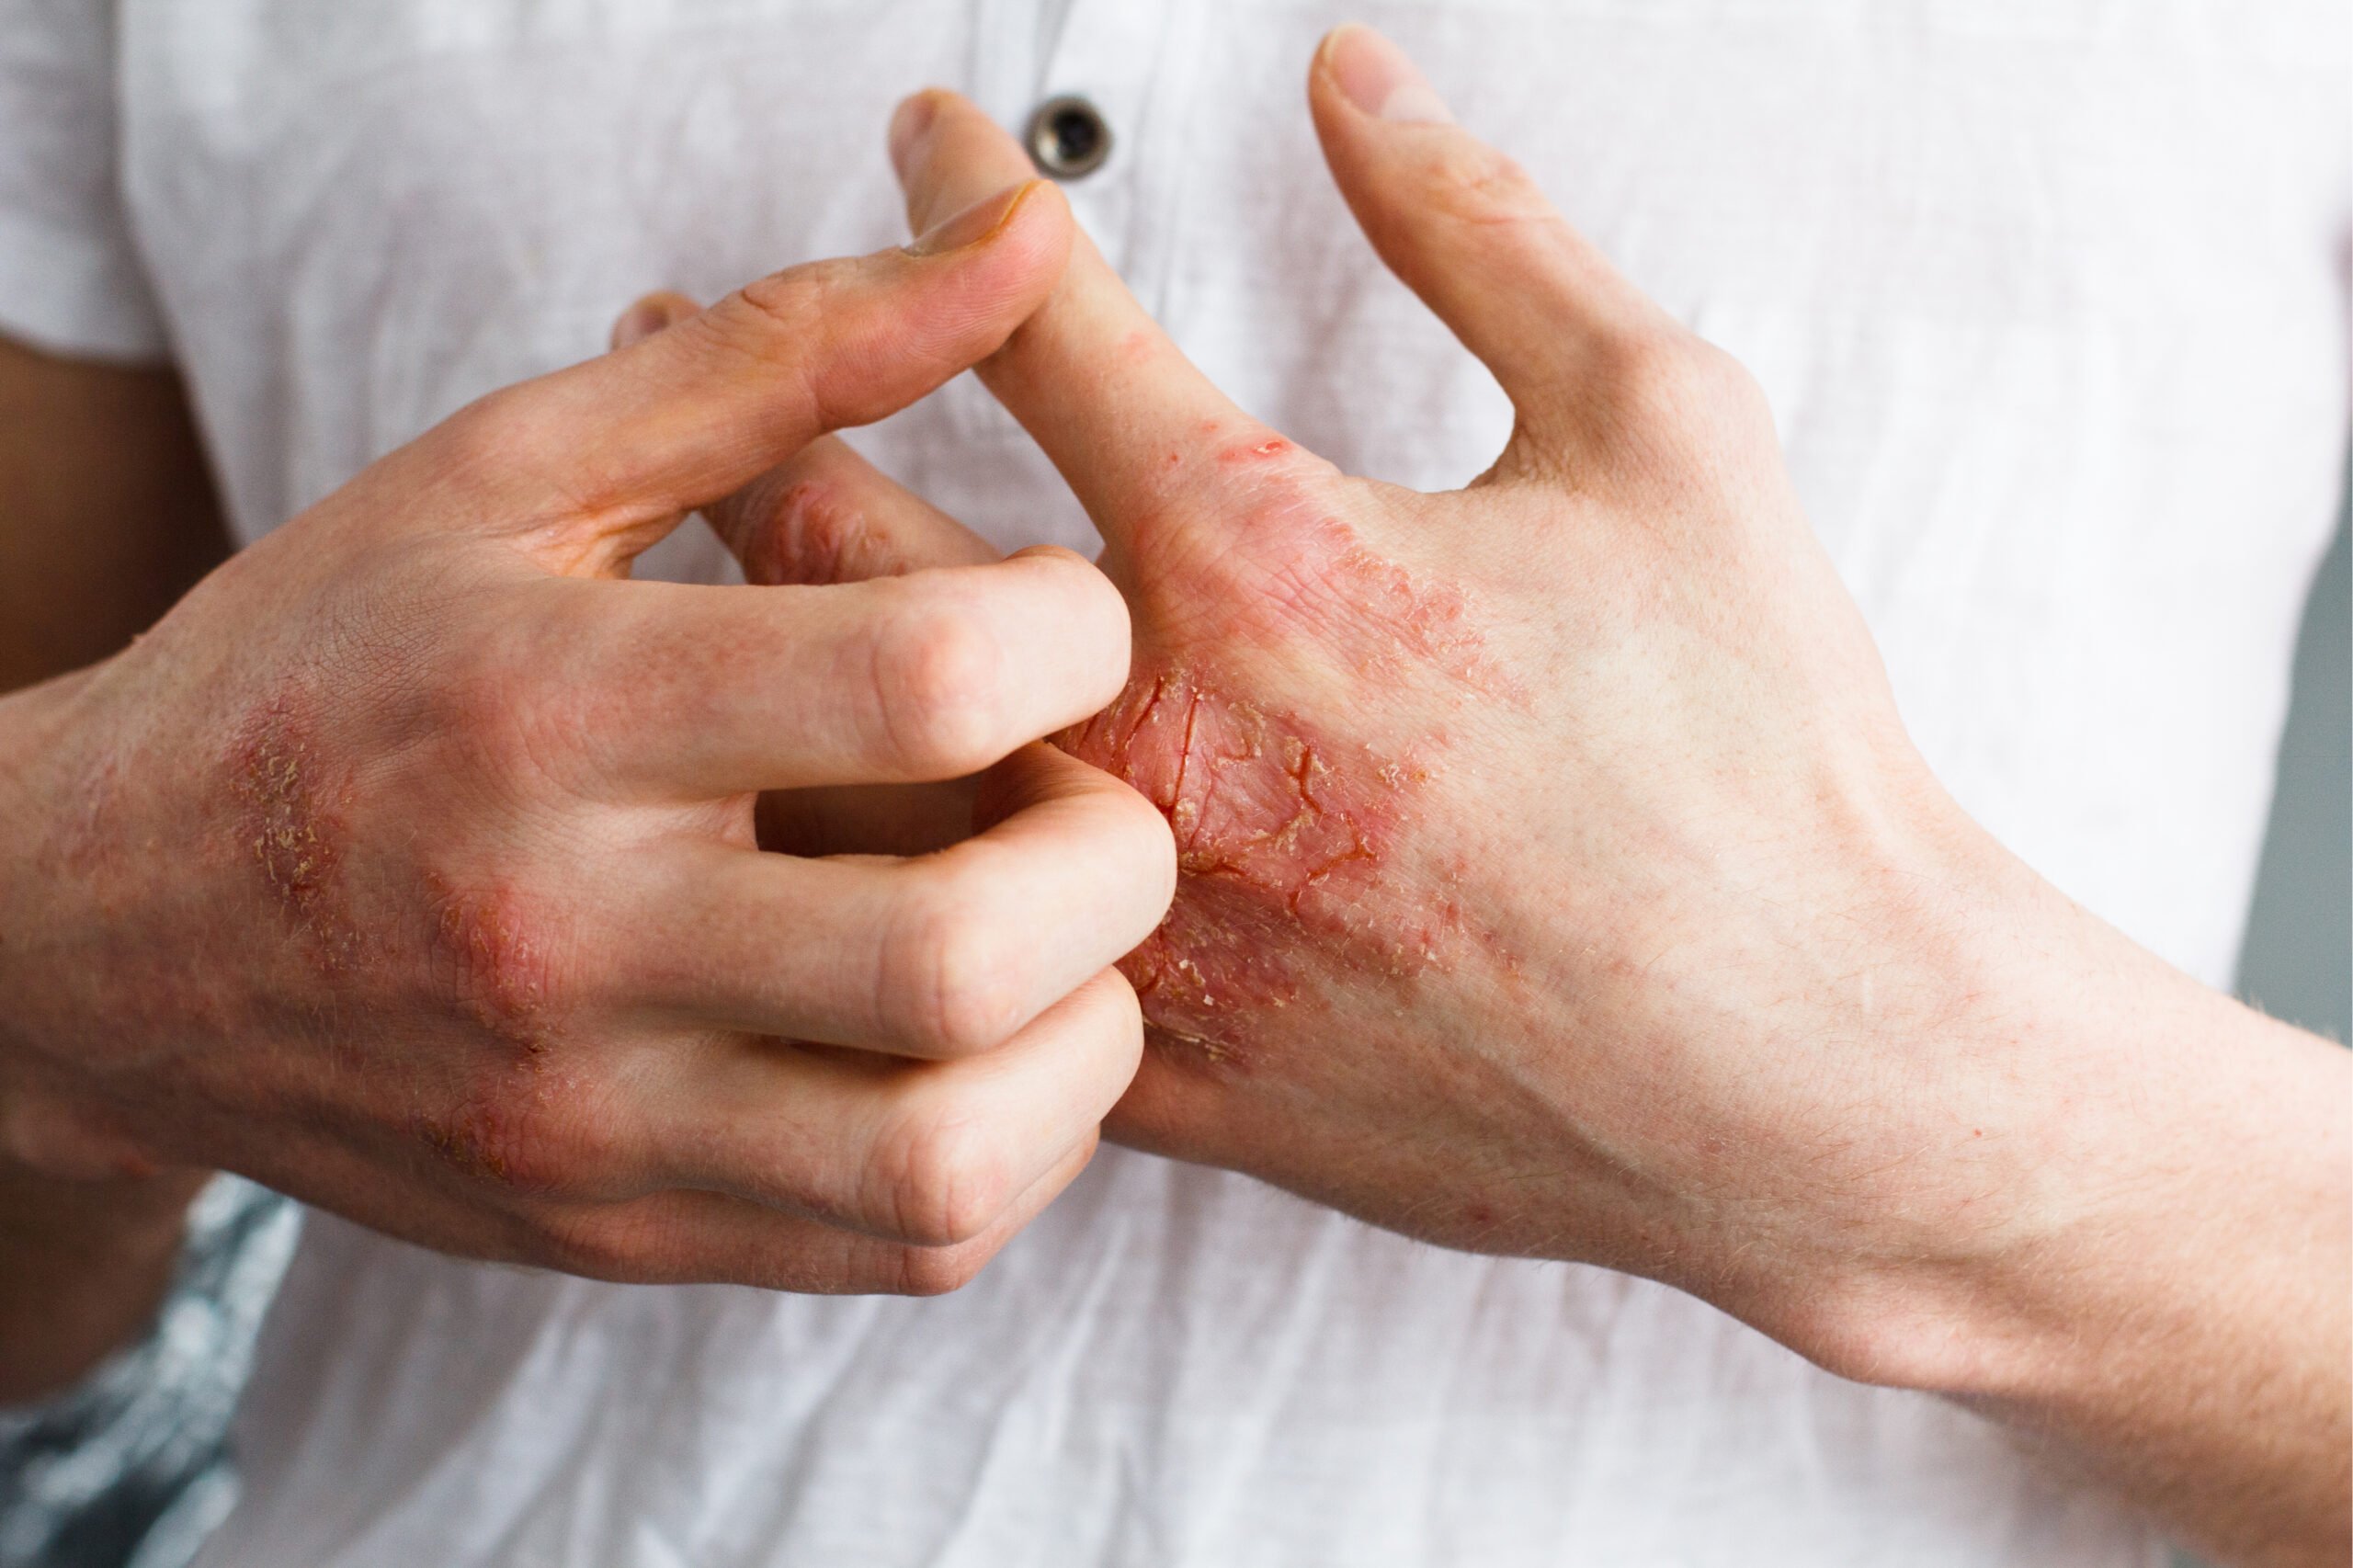 Causes of eczema for Atlanta patients